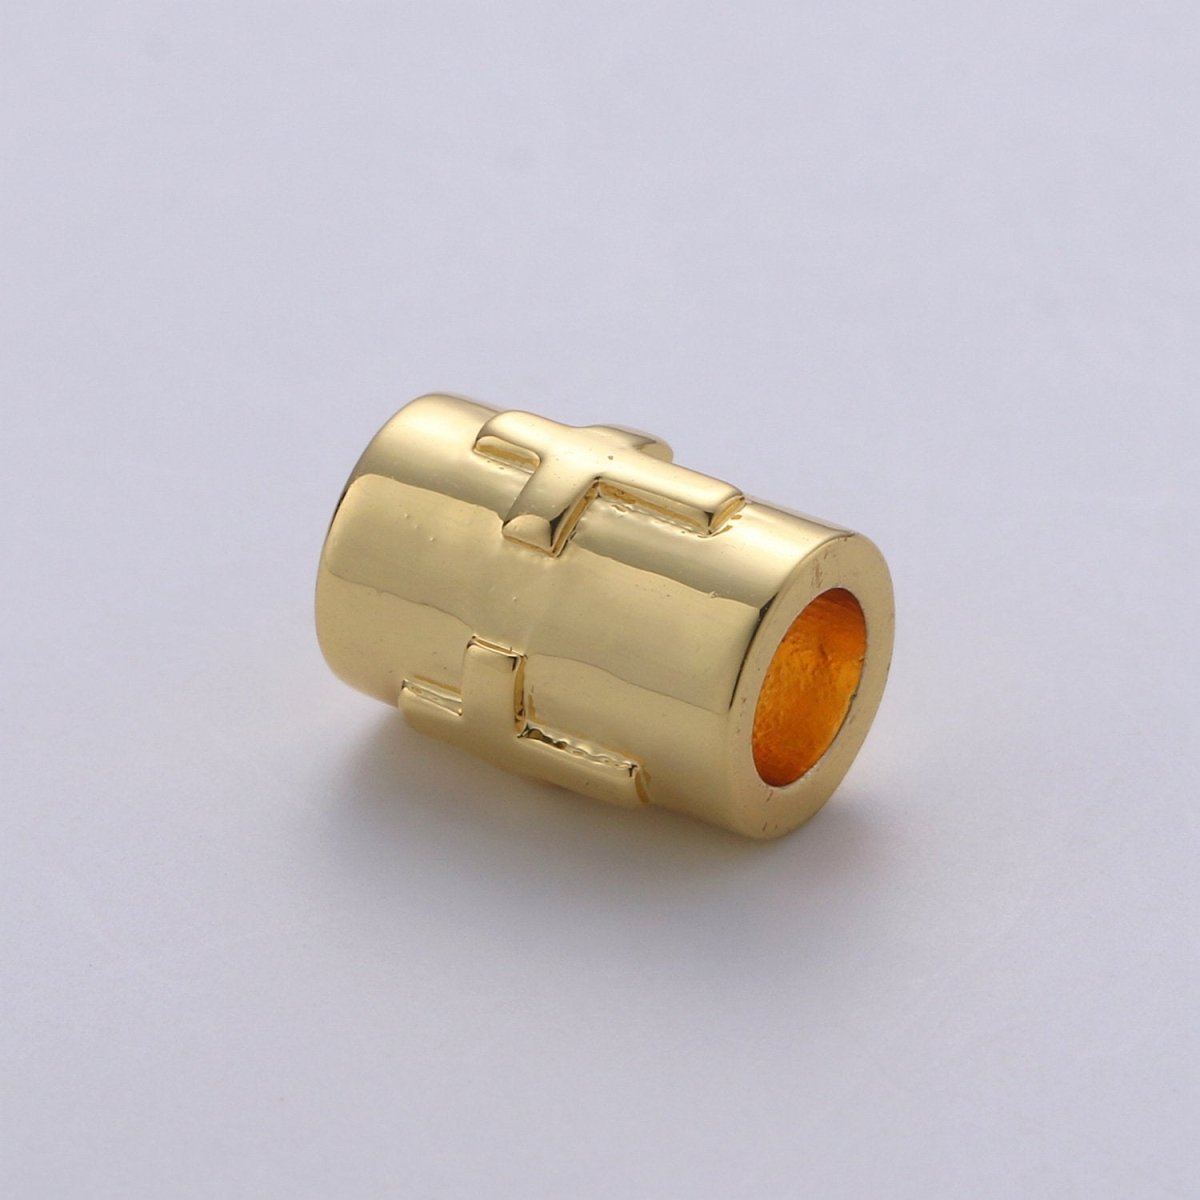 7x9mm Bead CZ Gold Beads Cross Beads cylinder Beads Charm for Bracelet Necklace Supply 4mm hole B-322 - DLUXCA